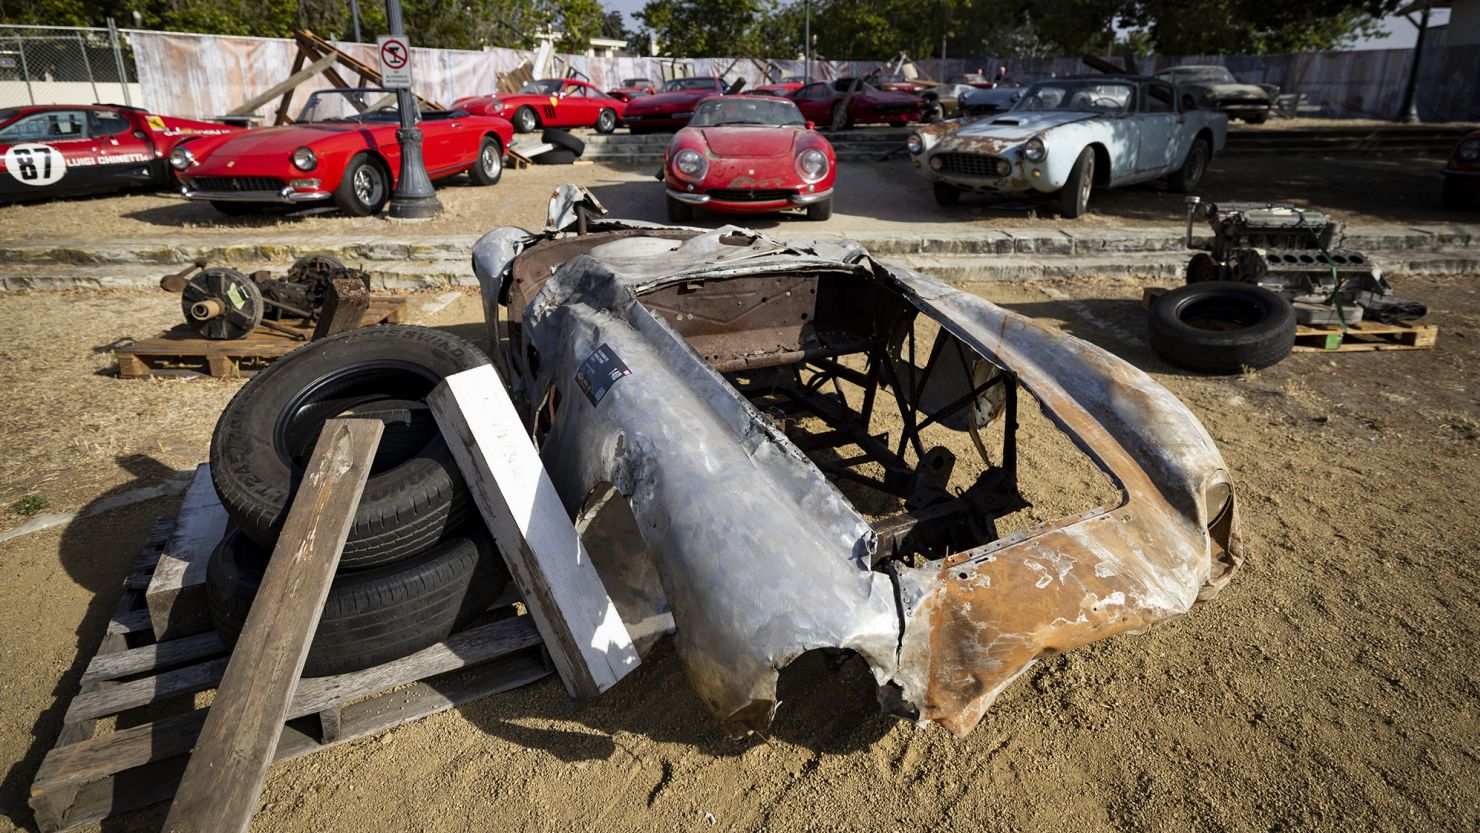 Junkyard engines that look right in your vintage car - Hagerty Media